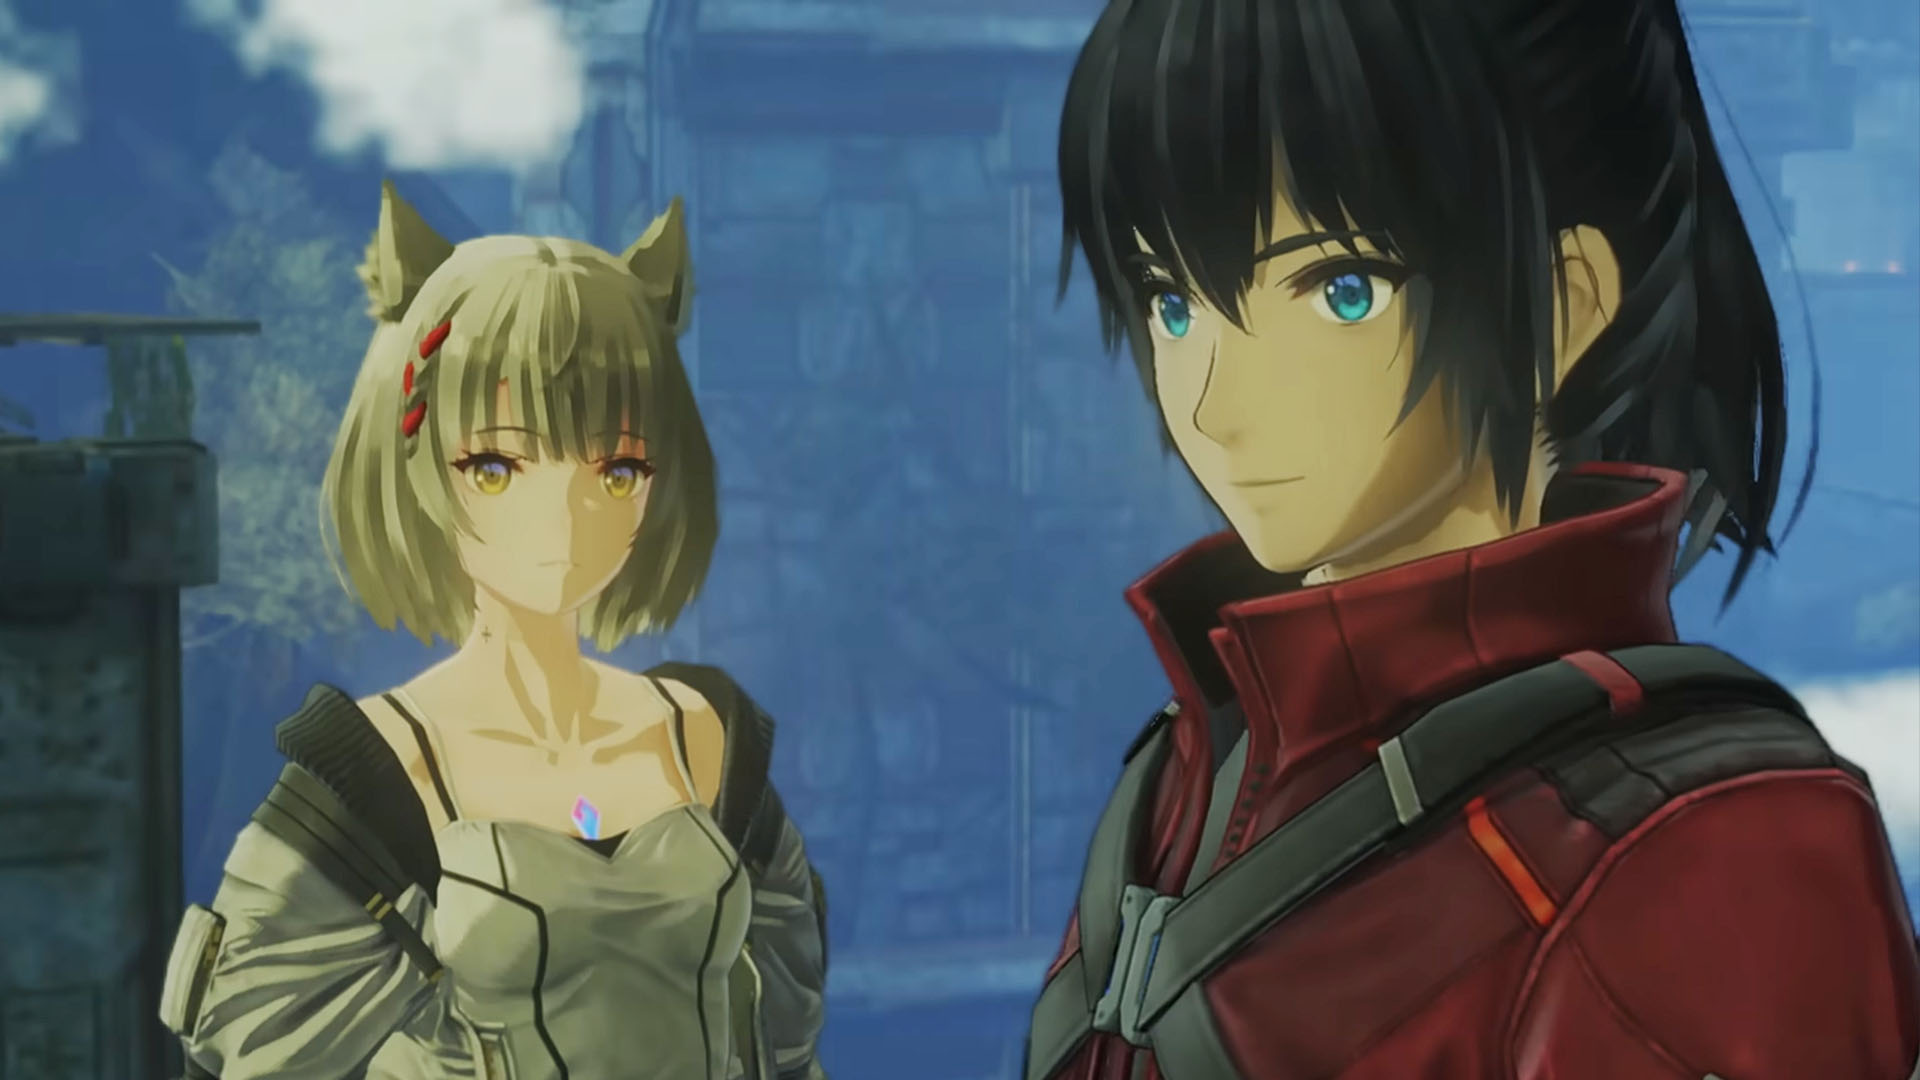 Xenoblade Chronicles 3: Meet the main characters